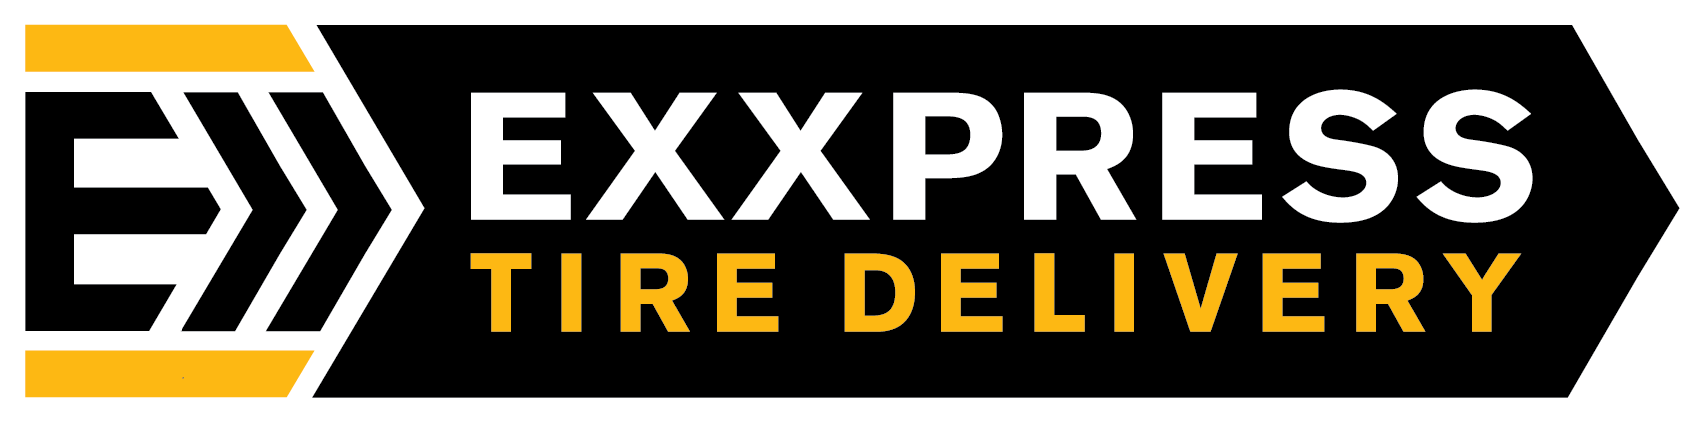 Exxpress Tire Delivery